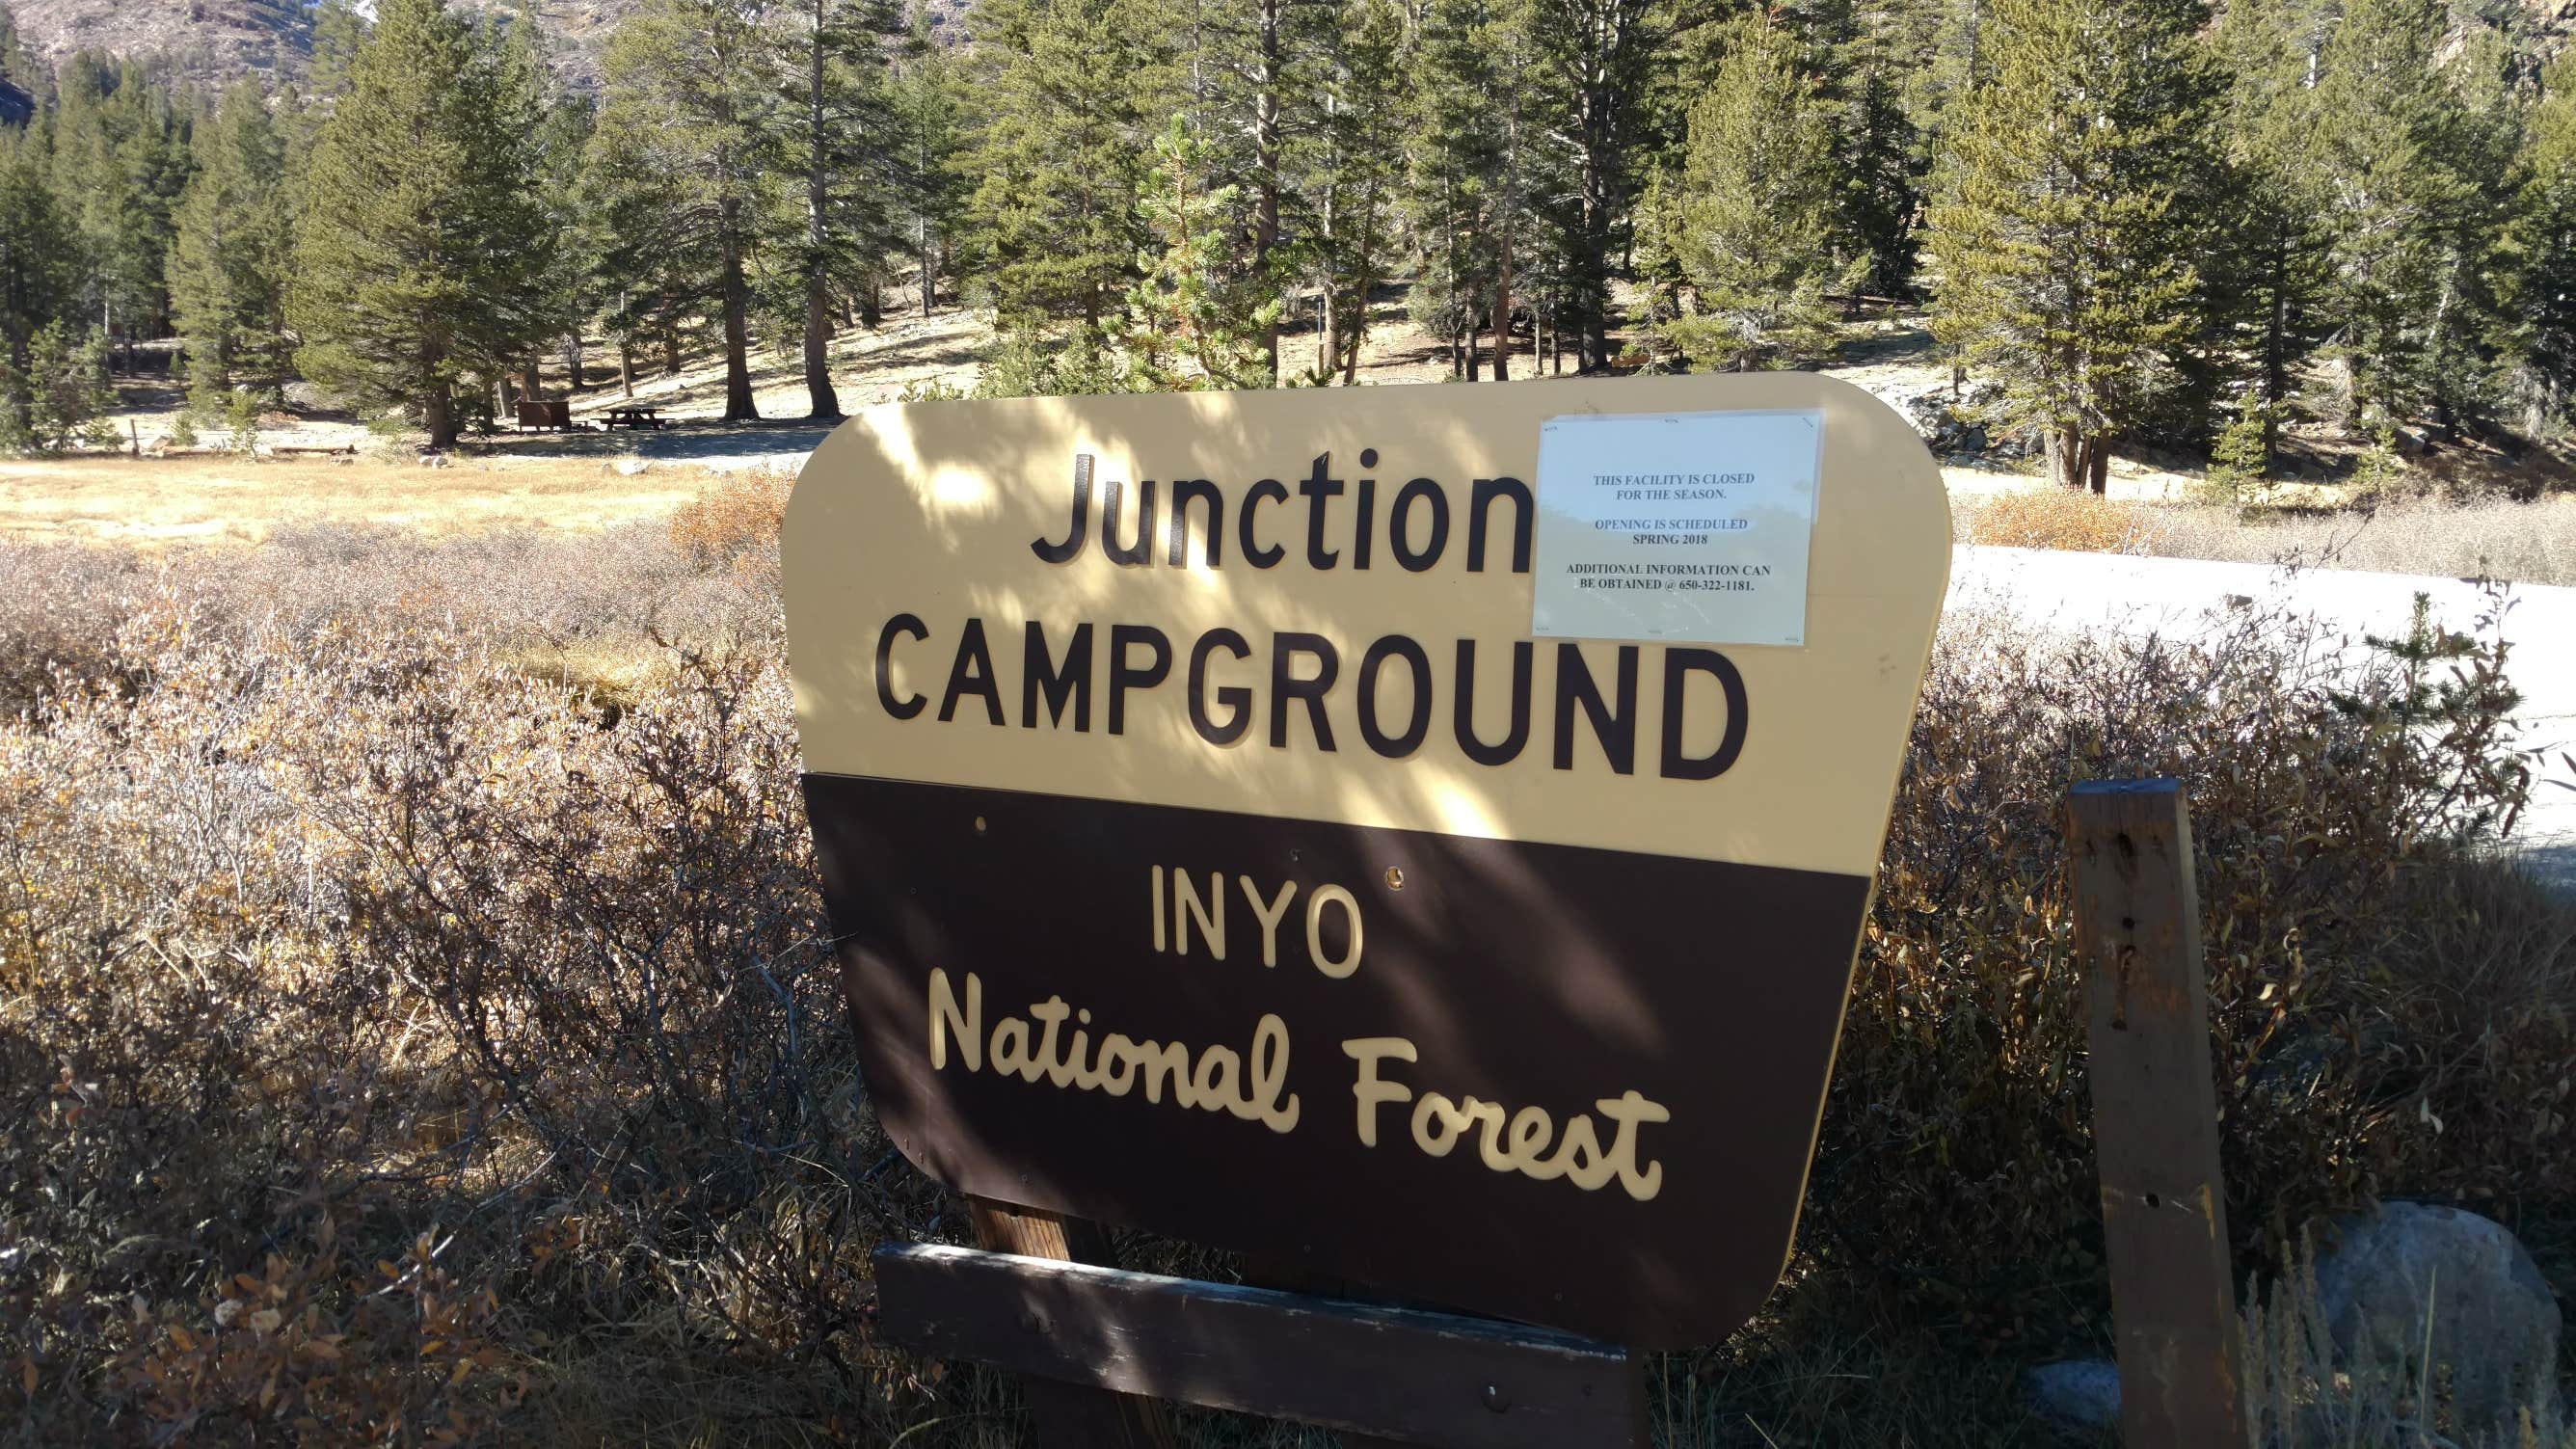 Camper submitted image from Junction Campground - 5